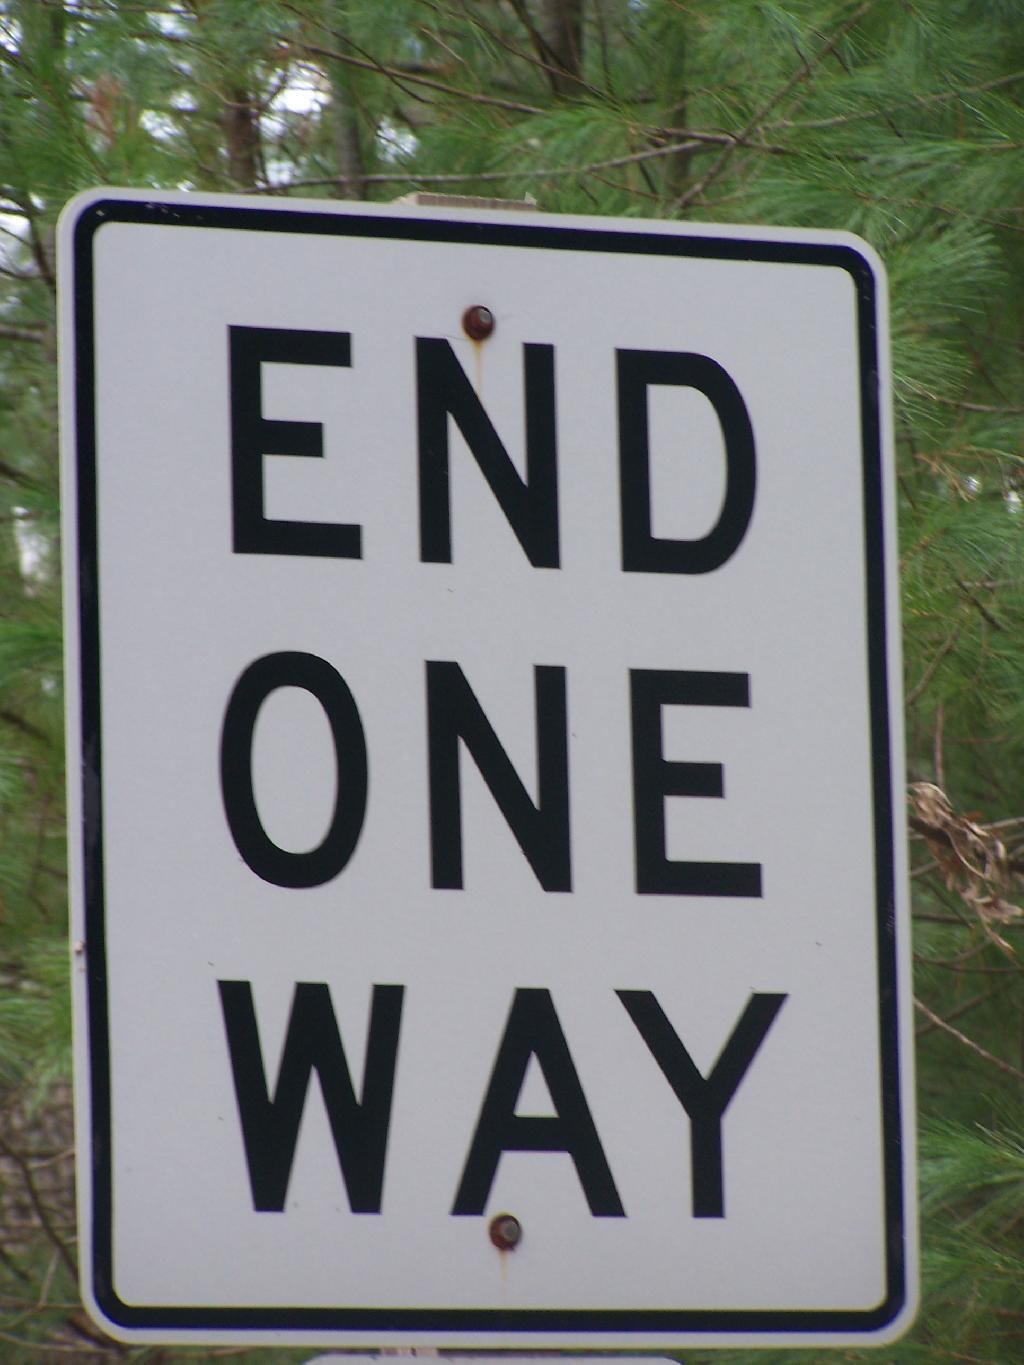 And End One Way